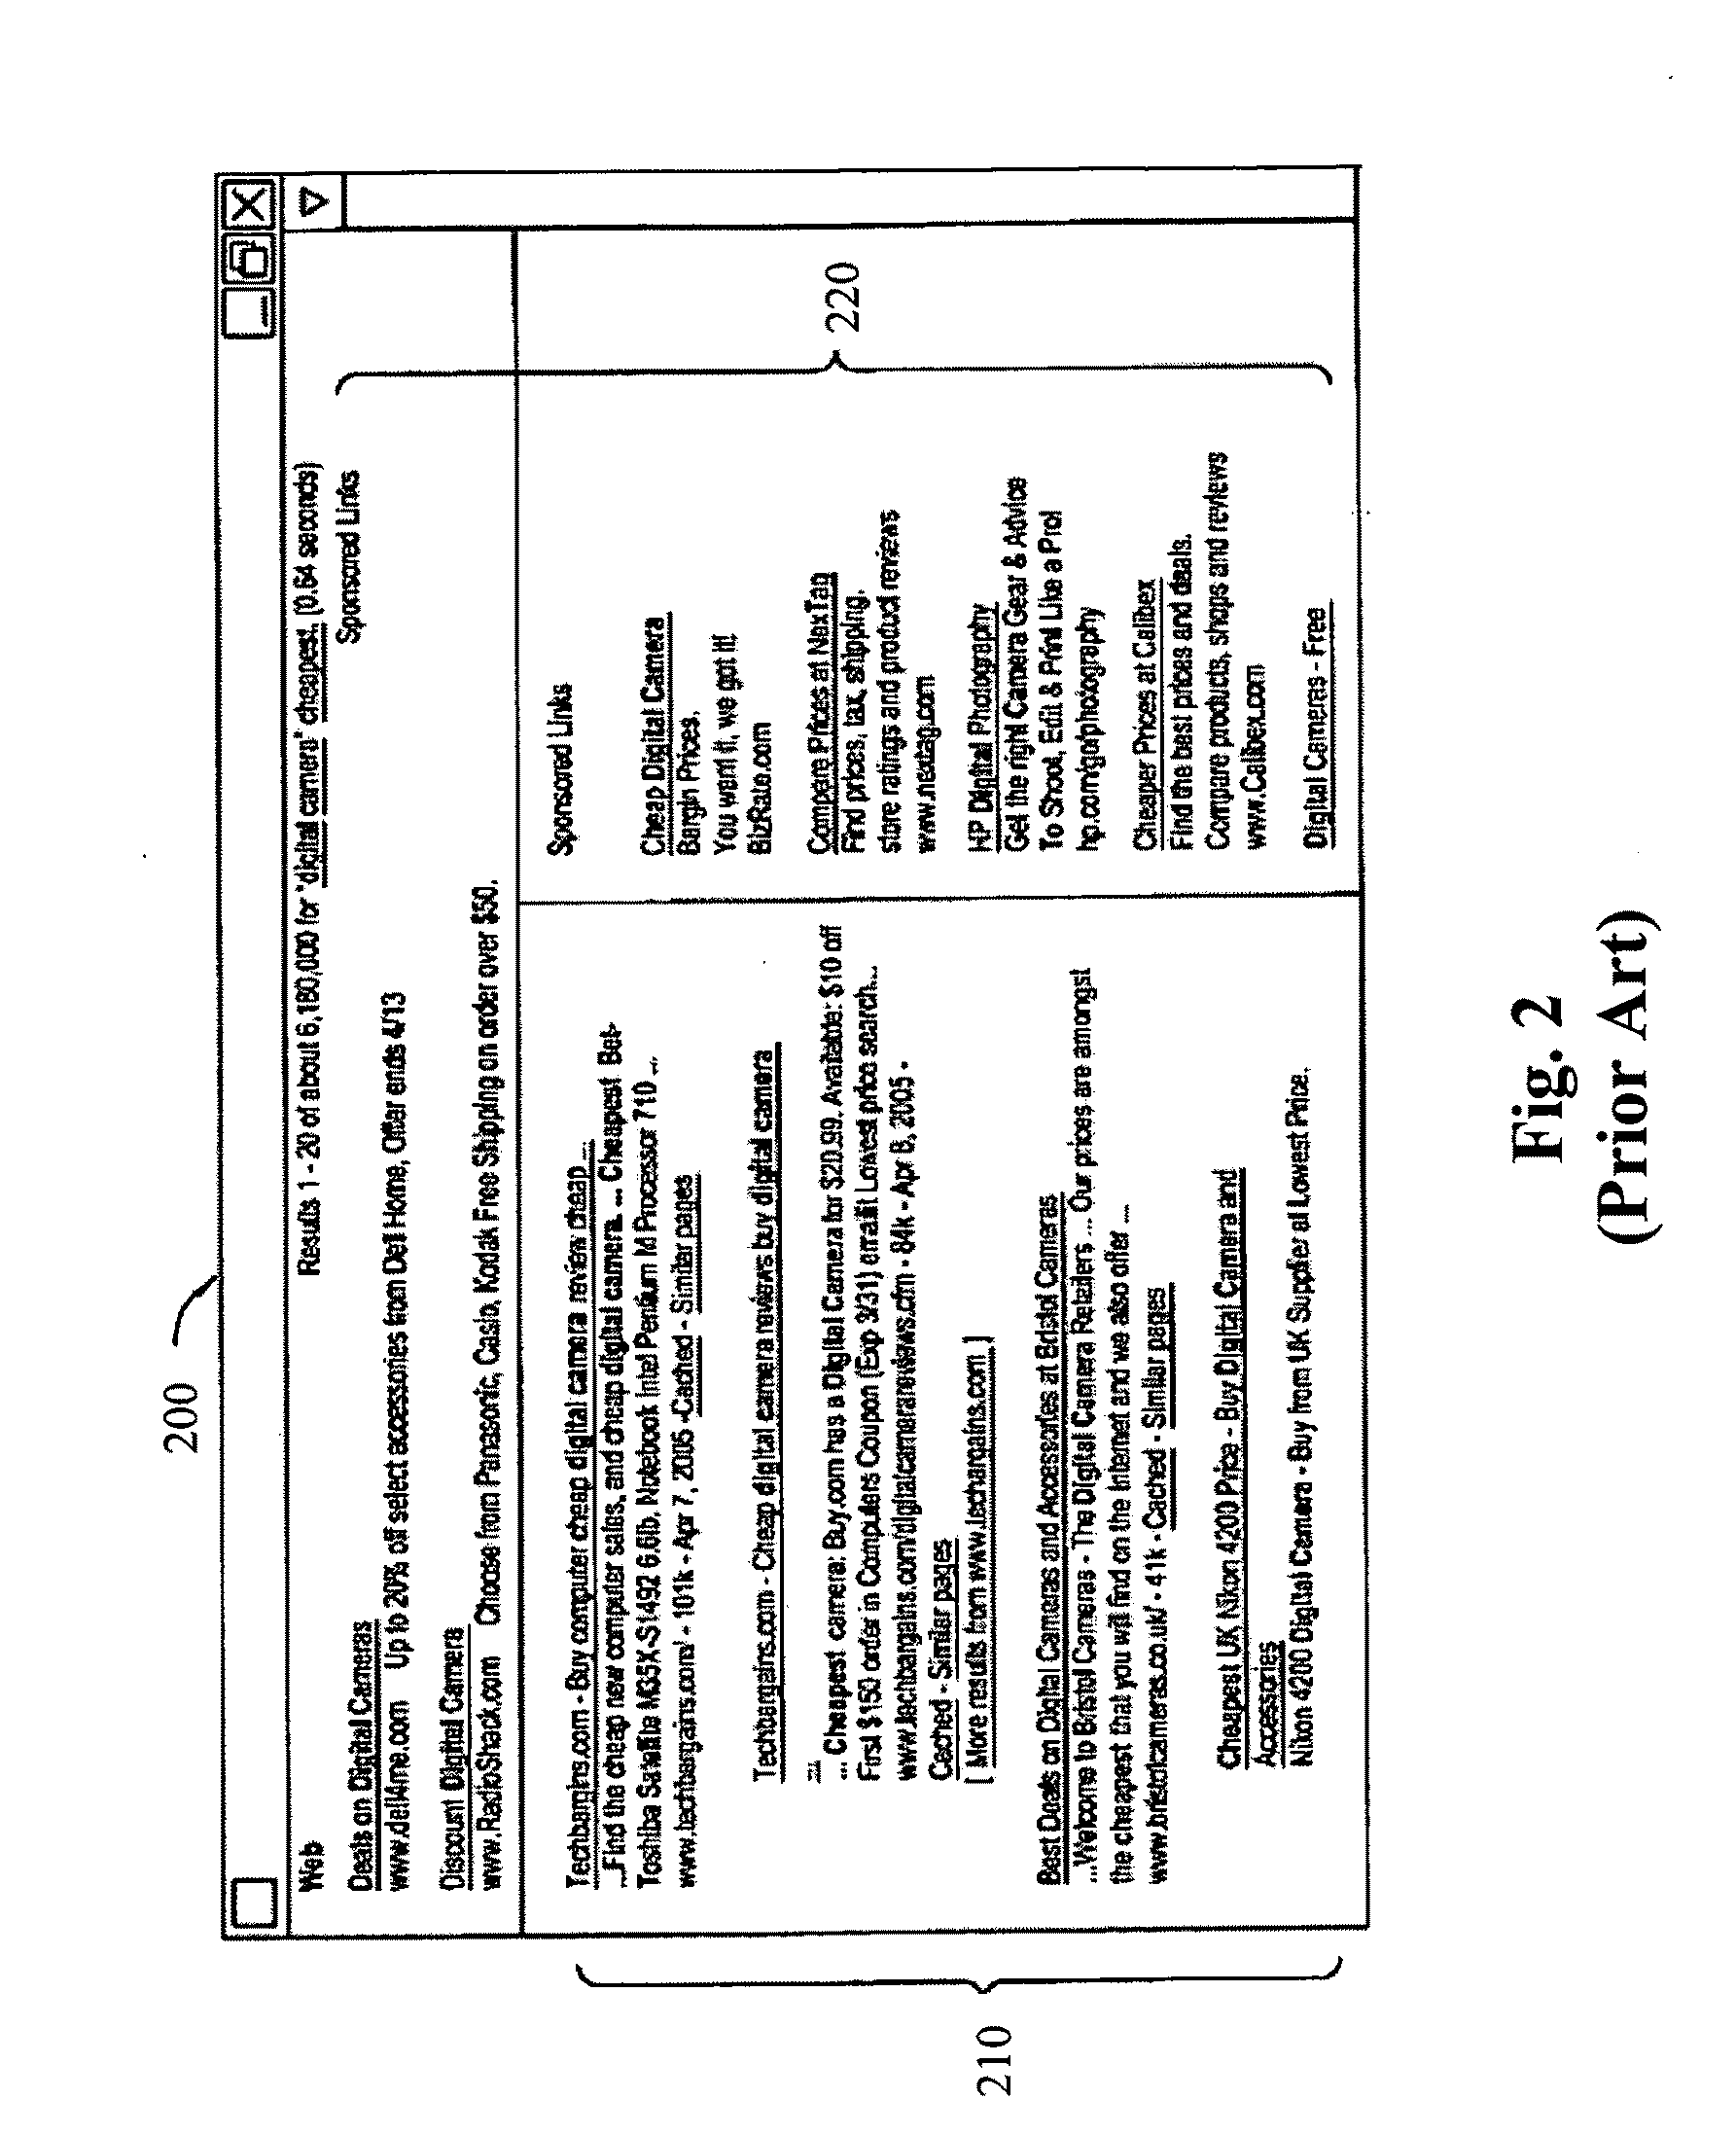 System and method for searching, identifying, and ranking merchants based upon preselected criteria such as social values